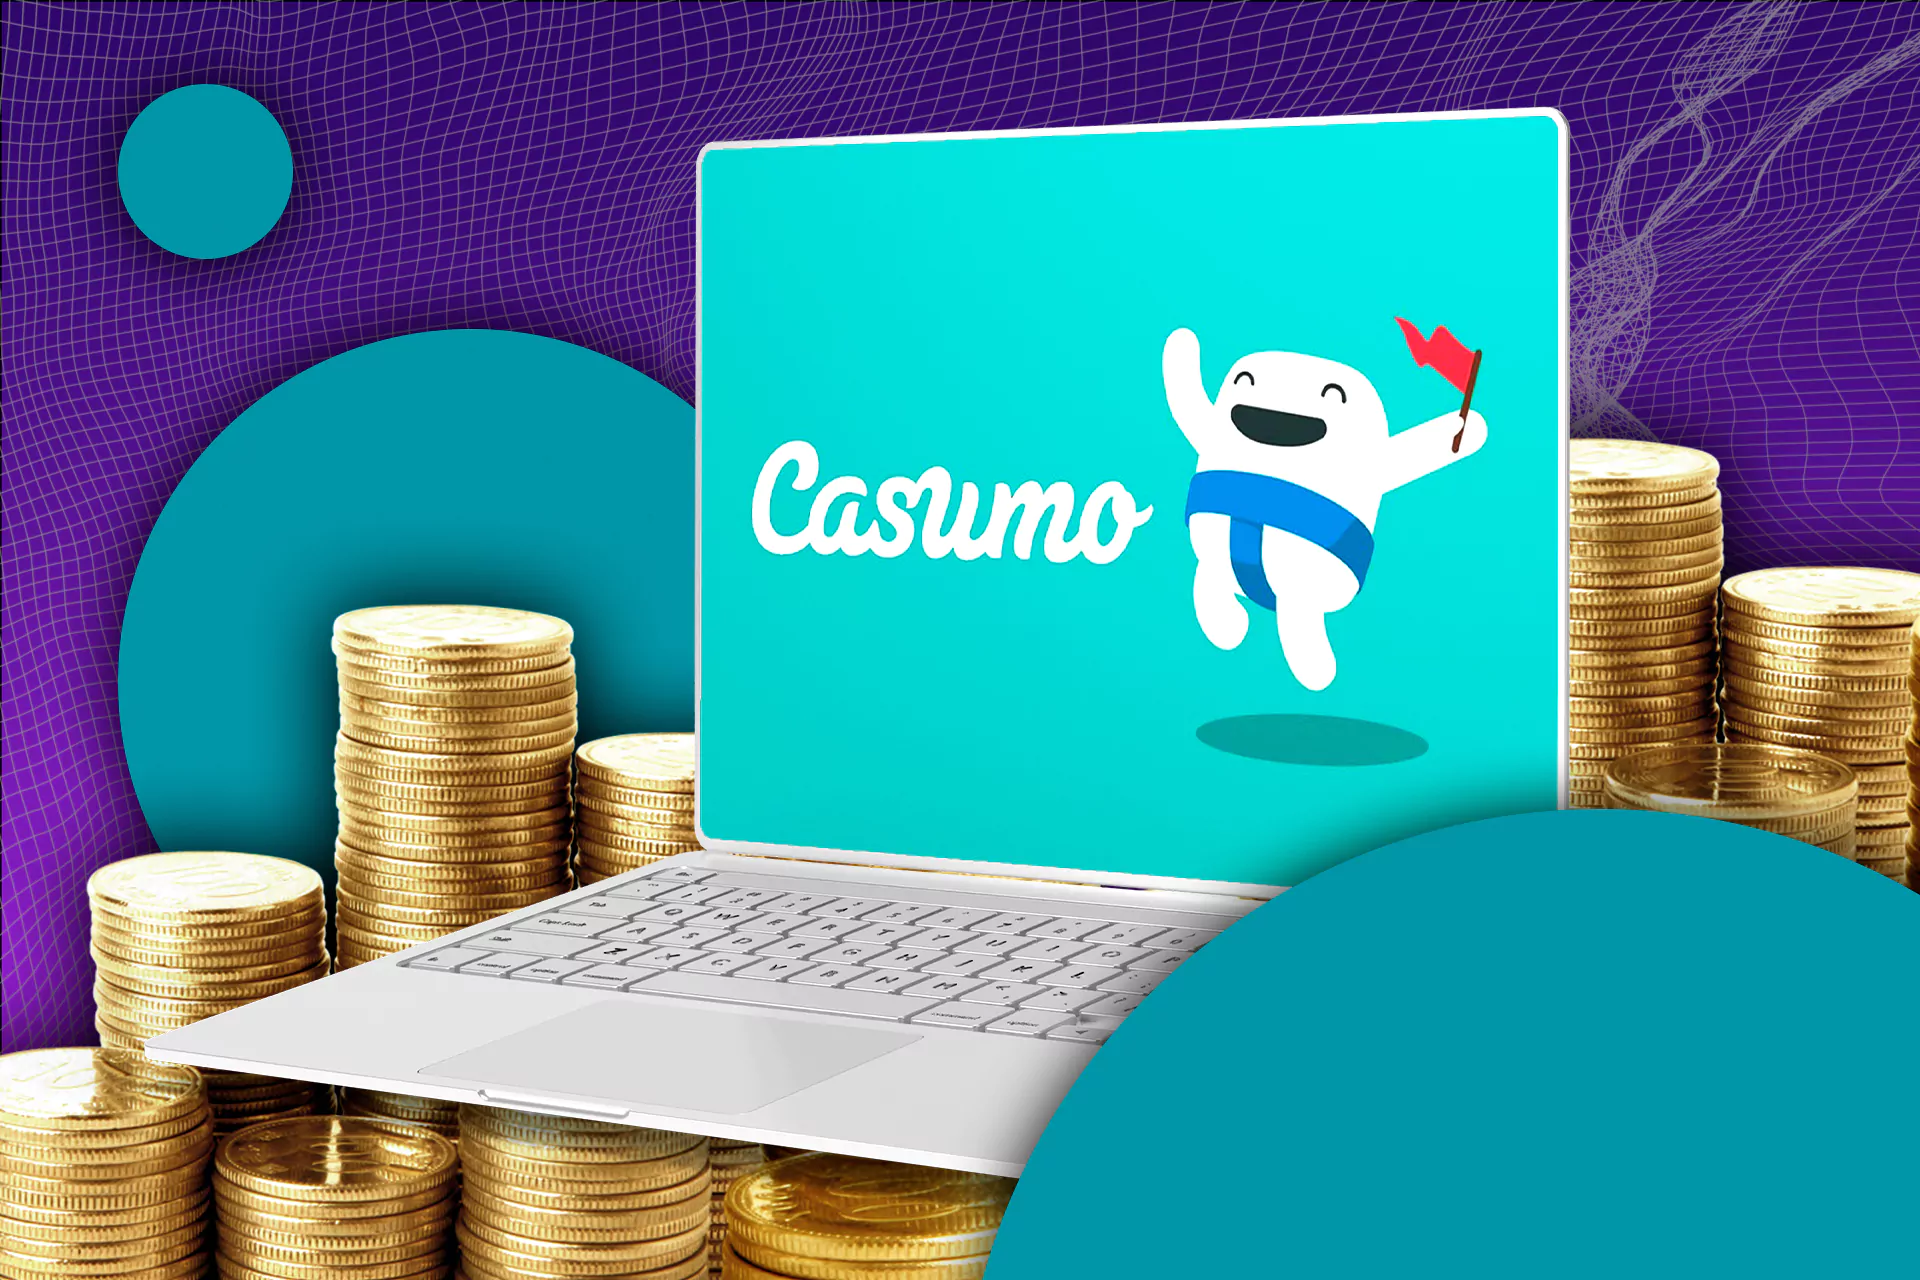 Casumo is a good sportsbook and online casino to register in.